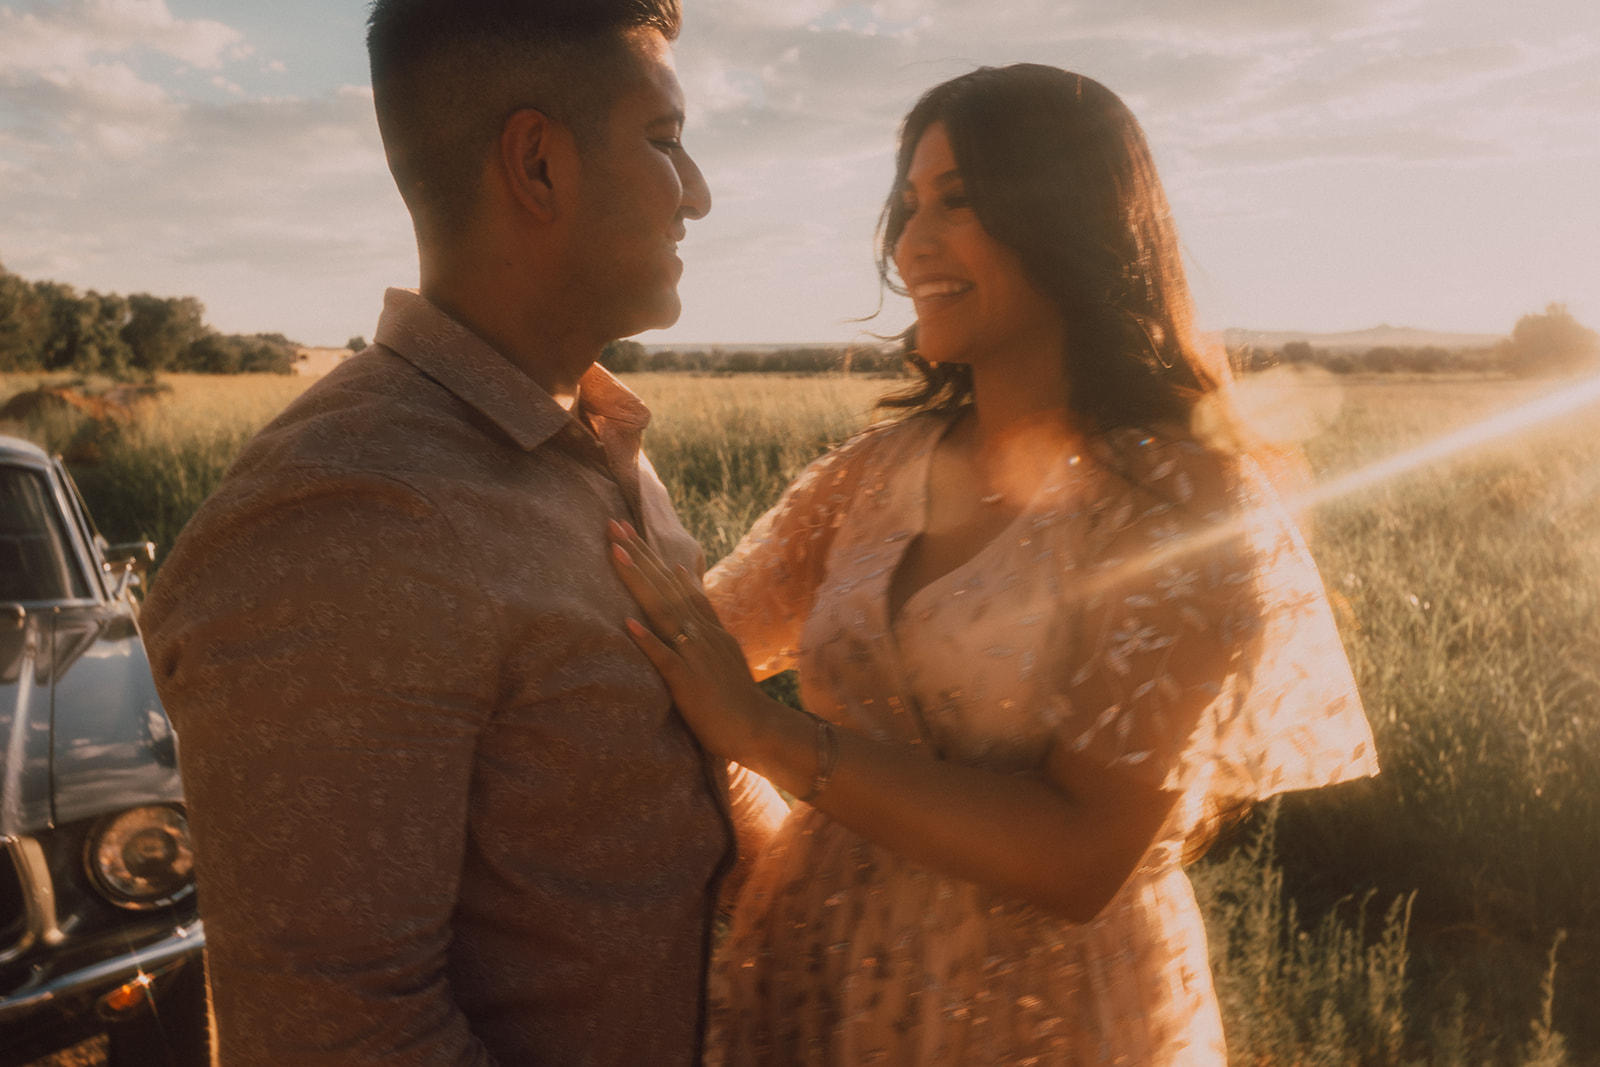 sunset maternity session with vintage car at golden hour